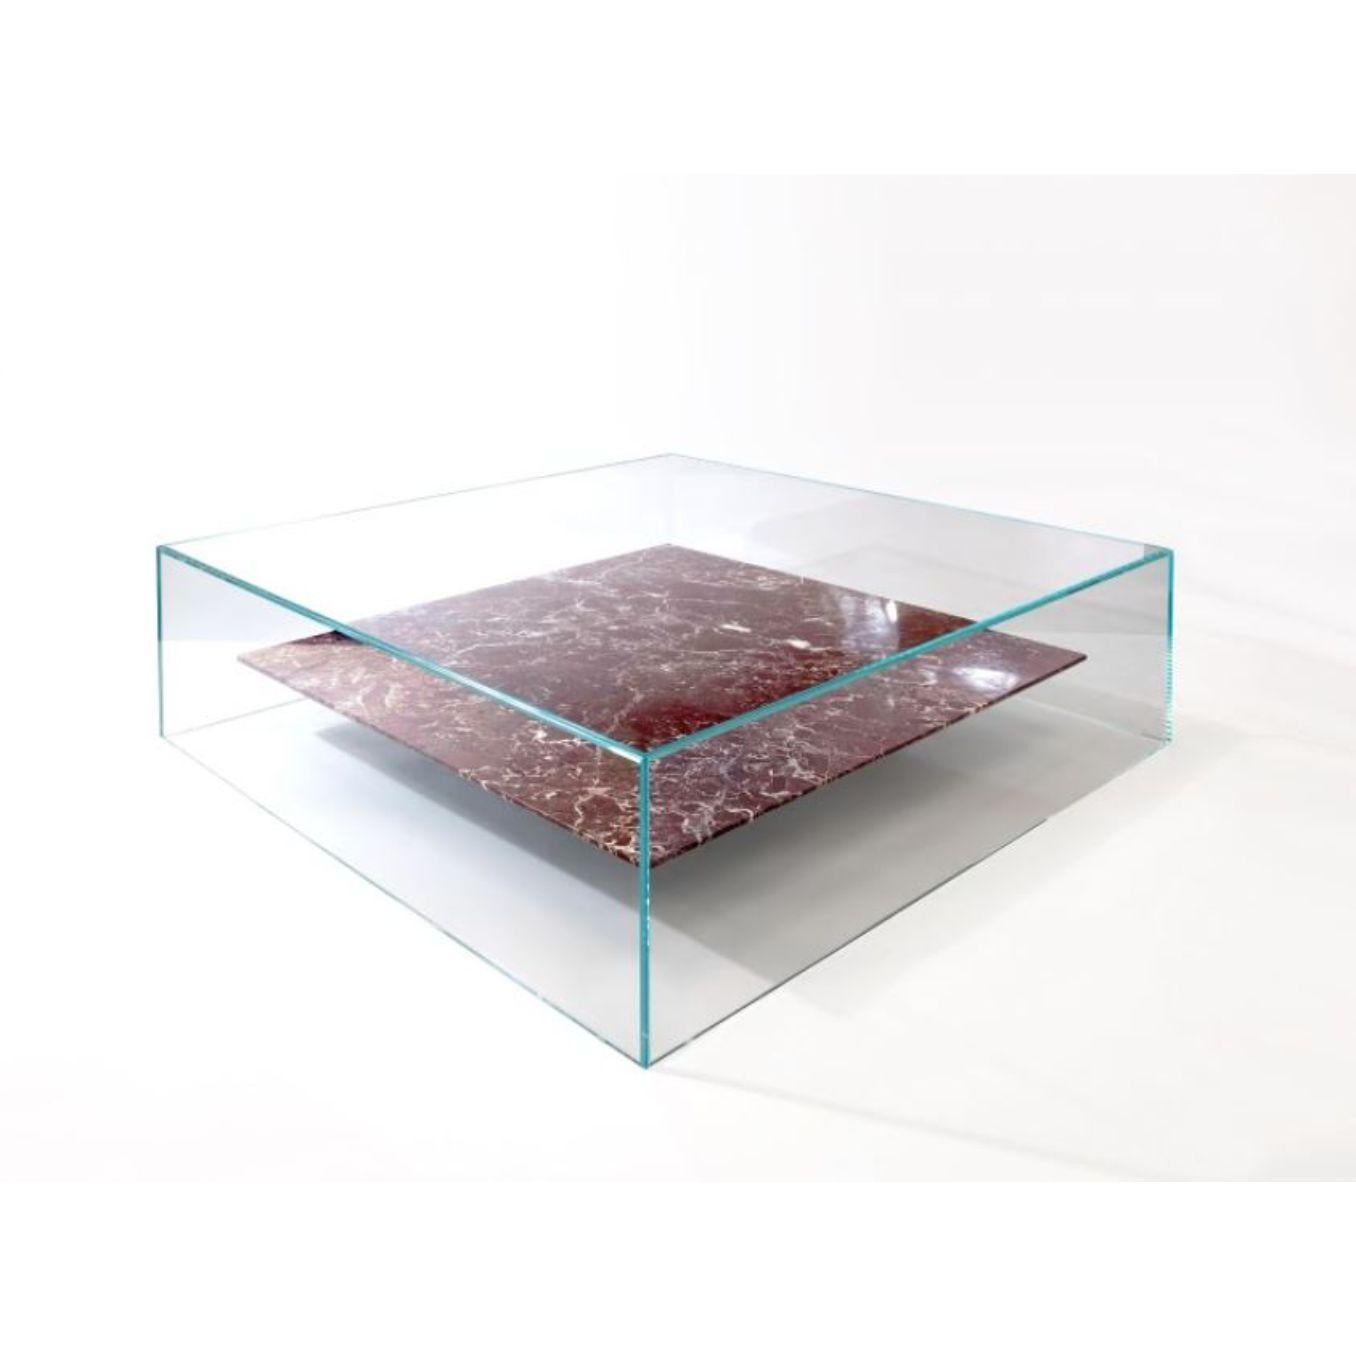 At swim two tables by Claste
Dimensions: D 122 x W 122 x H 35.5 cm
Material: Marble, Glass
Weight: 225 kg

Since 2017 Quinlan Osborne has cultivated an aesthetic in his work that is rooted in the passion for contemporary design he developed